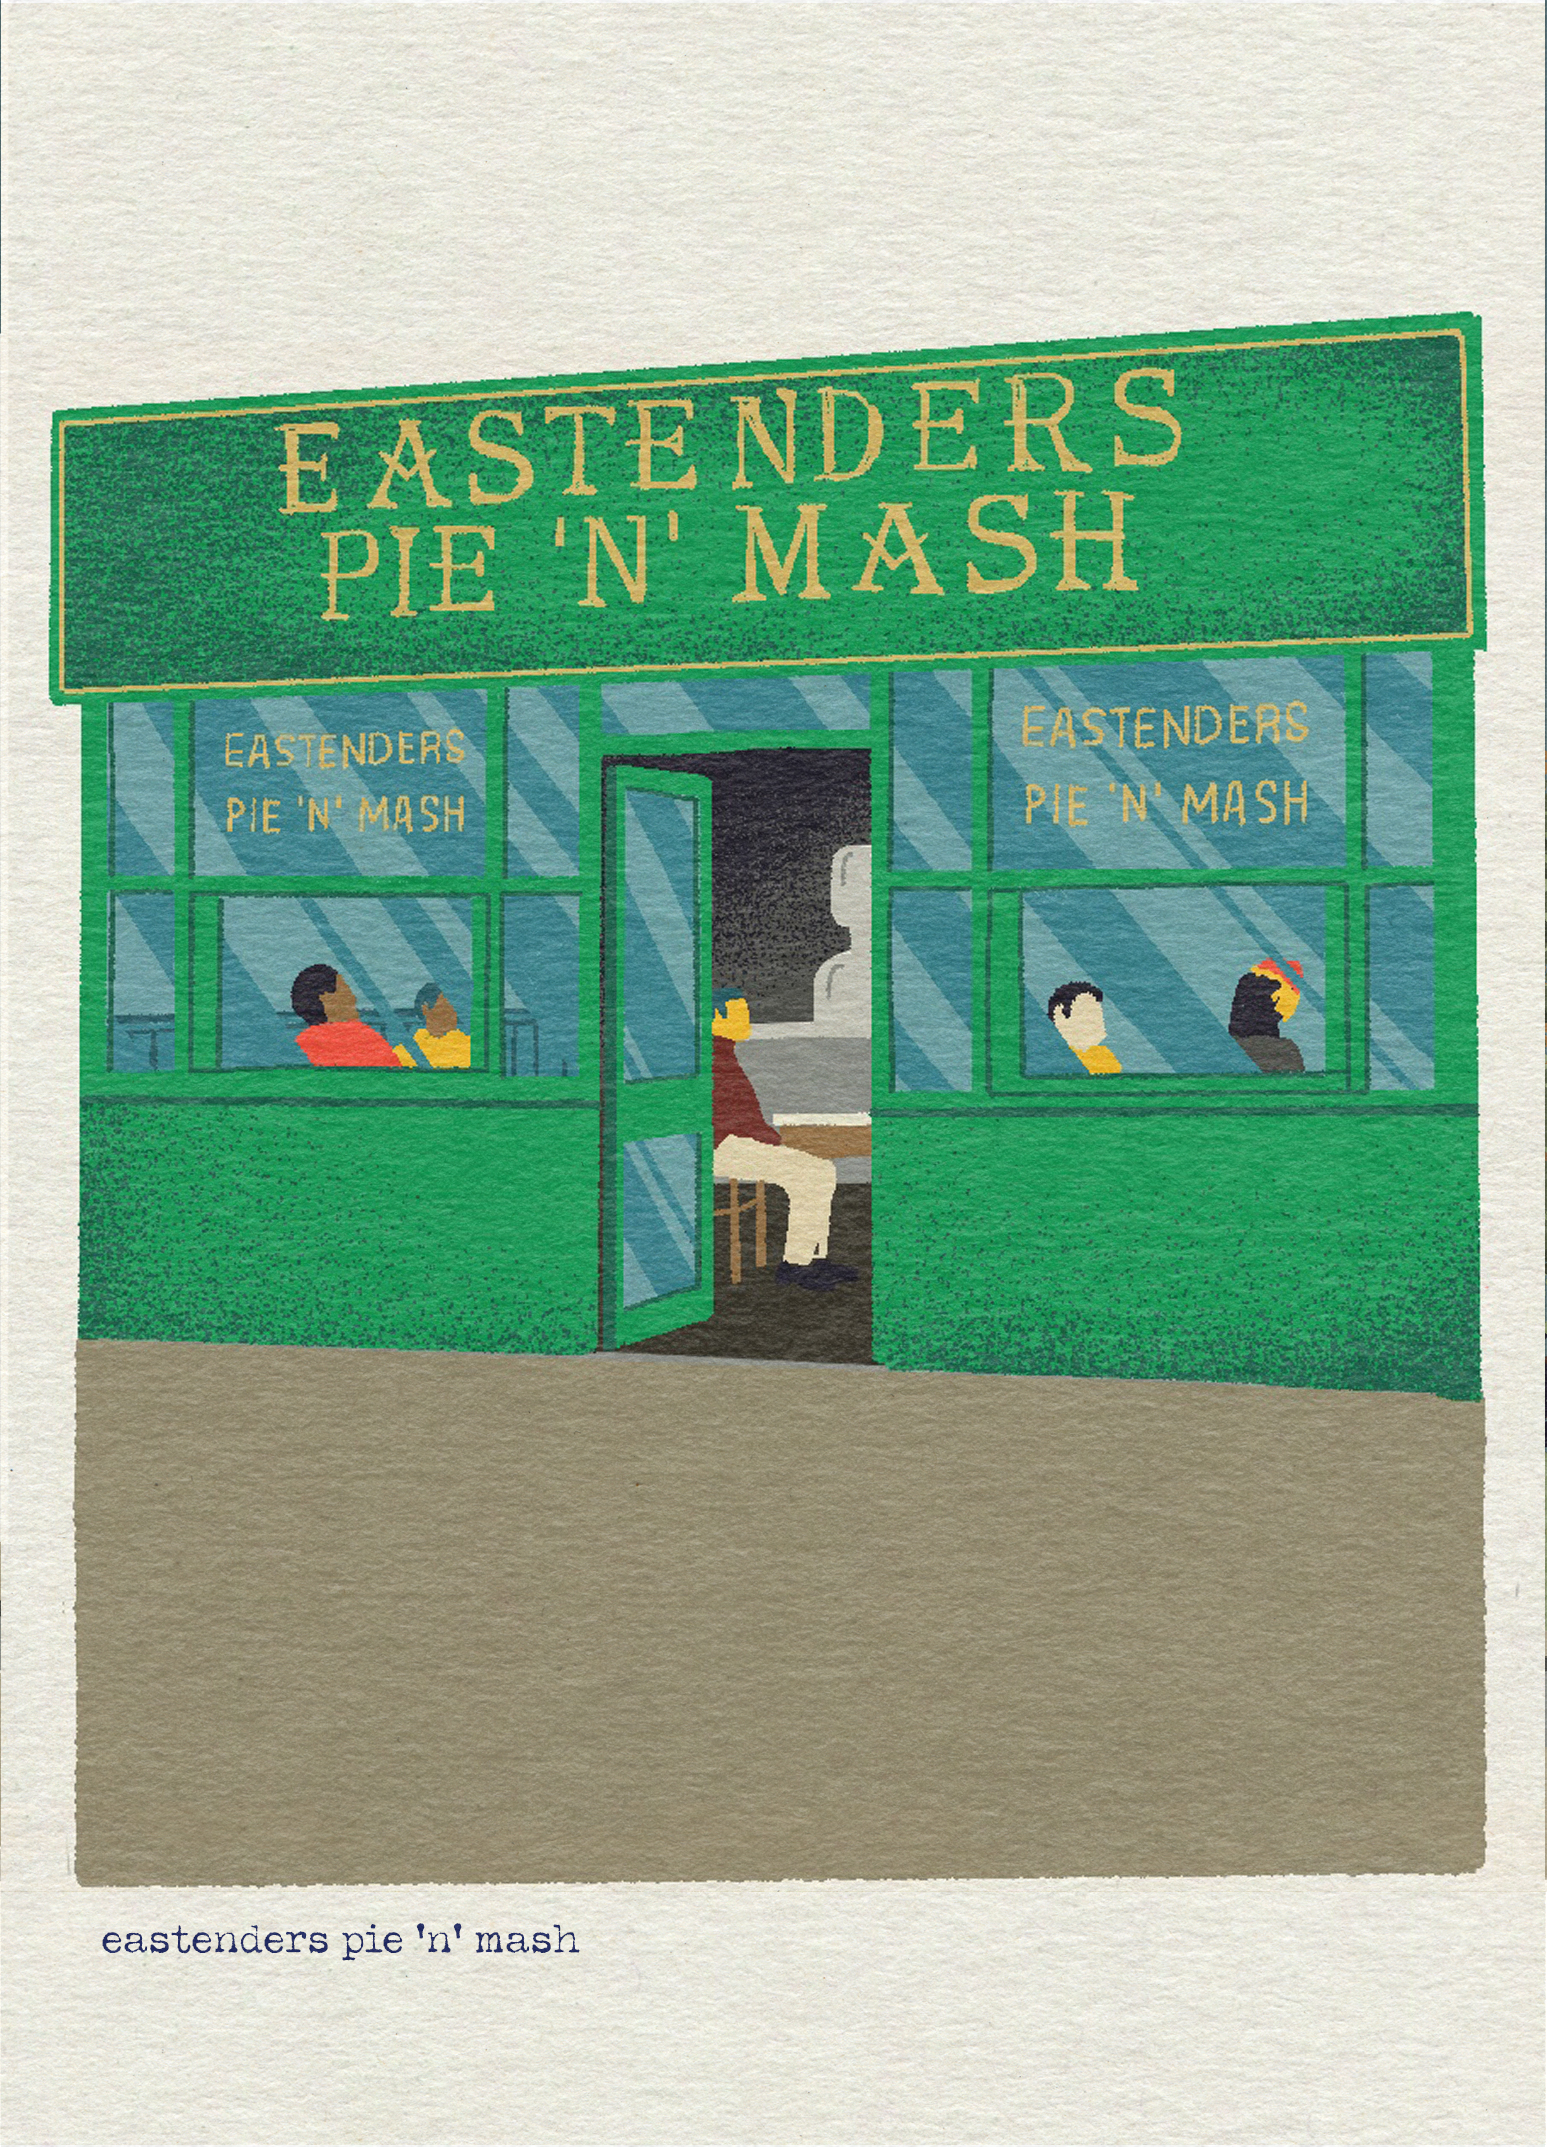 The East End is home to countless traditional pie shops that have been serving the authentic Cockney classic the same way for generations. Run by Brian Boulter and his son David, EastEnders Pie n’ Mash in Poplar is one of these shops working hard to keep this tradition alive. 